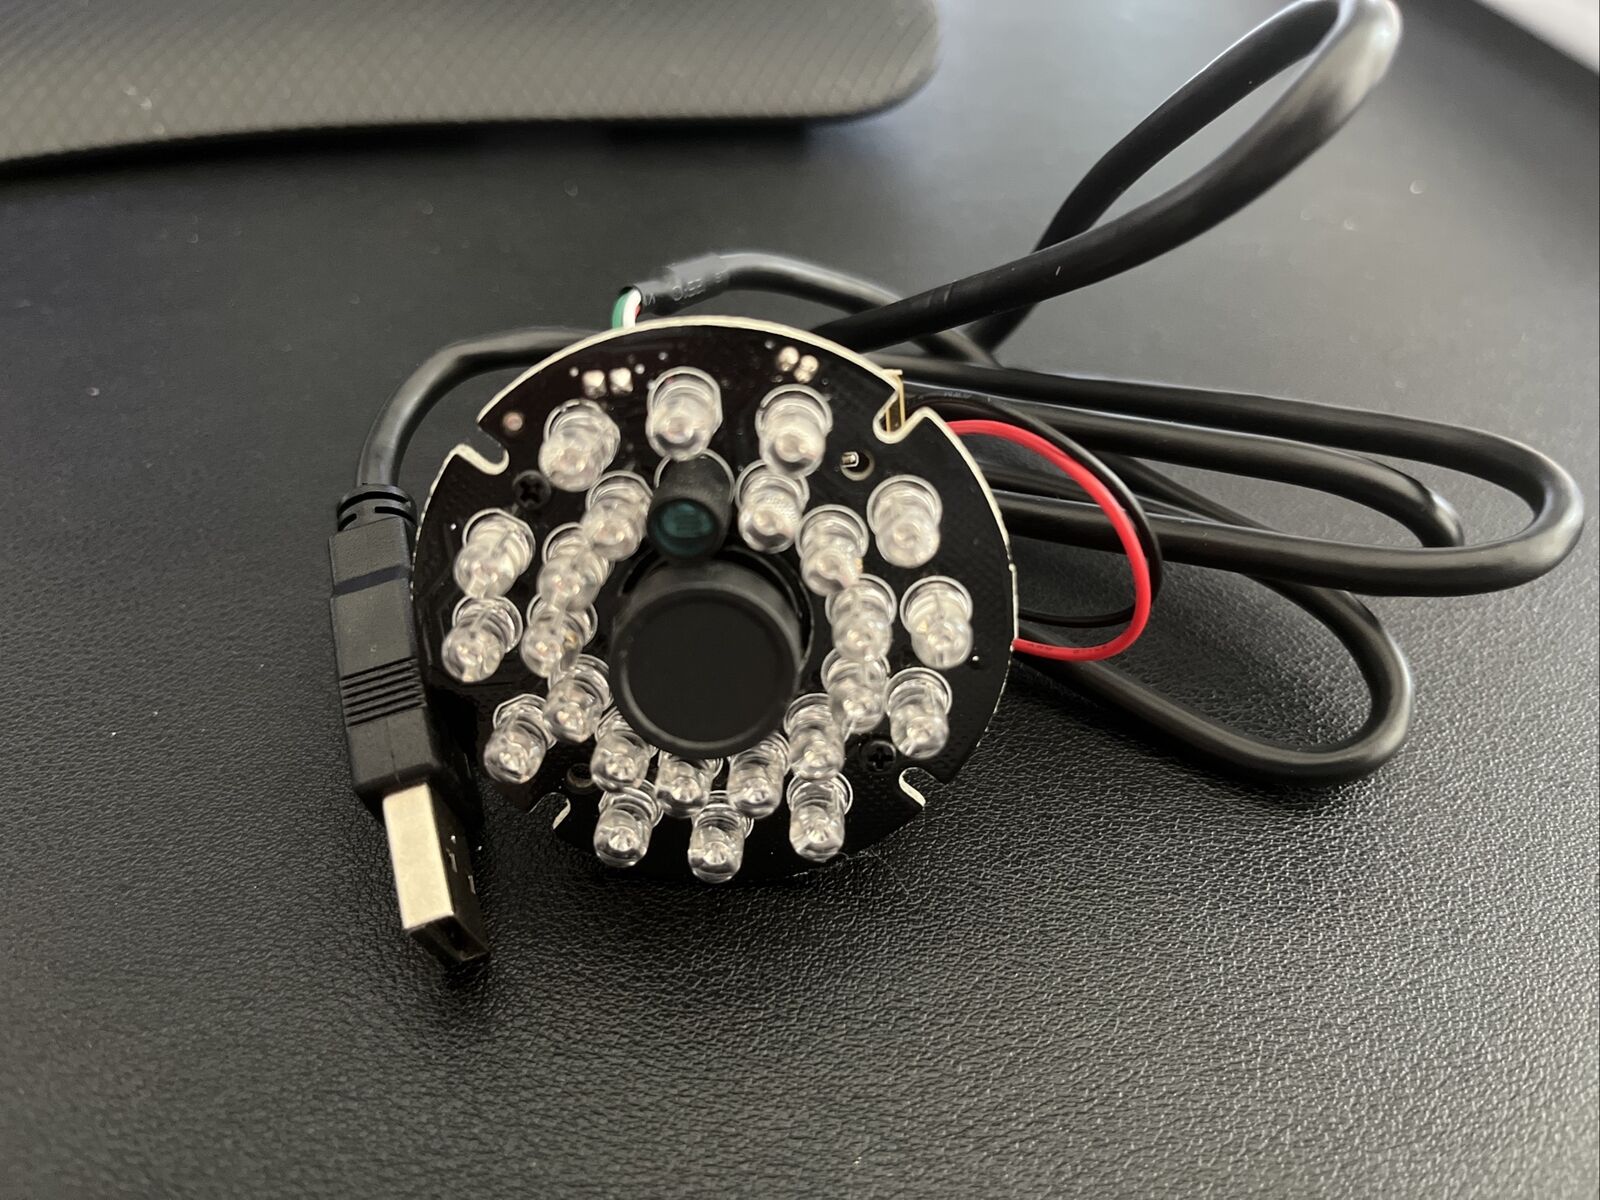 ELP USB Camera ELP-USBFHD04H-RL28 Works With Raspberry Pi With Night Vision!. Available Now for 50.00